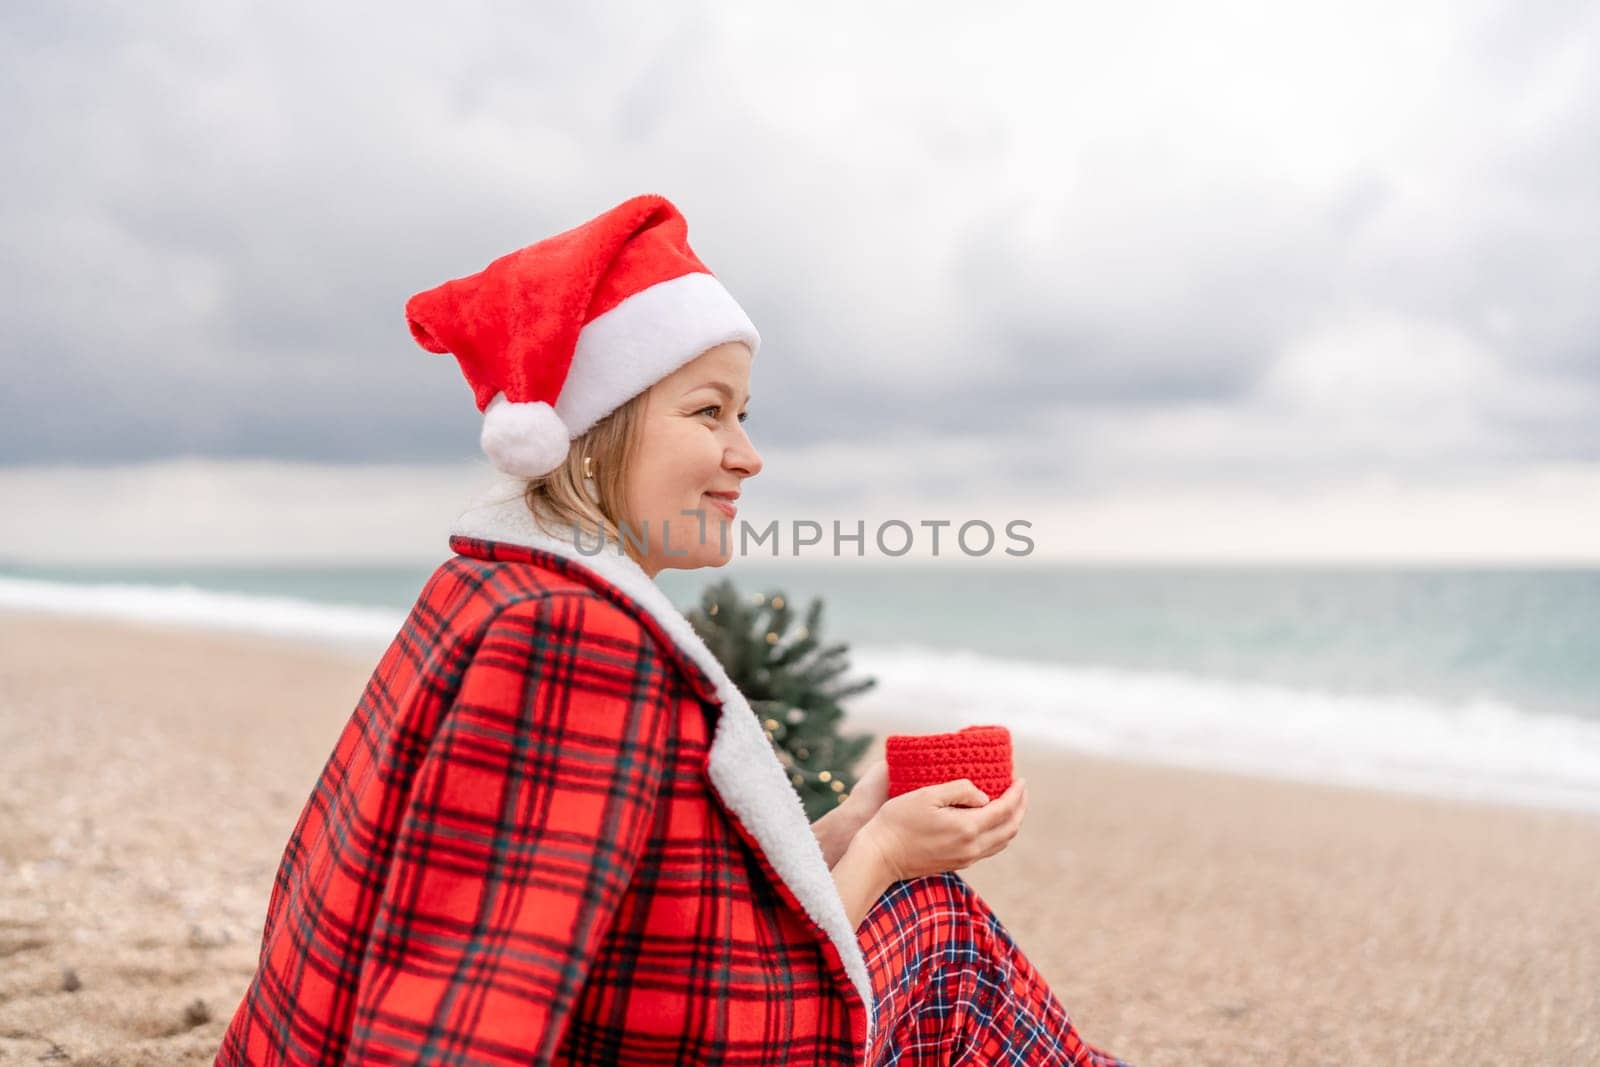 Sea Lady in Santa hat plaid shirt with a red mug in her hands enjoys beach with Christmas tree. Coastal area. Christmas, New Year holidays concep.